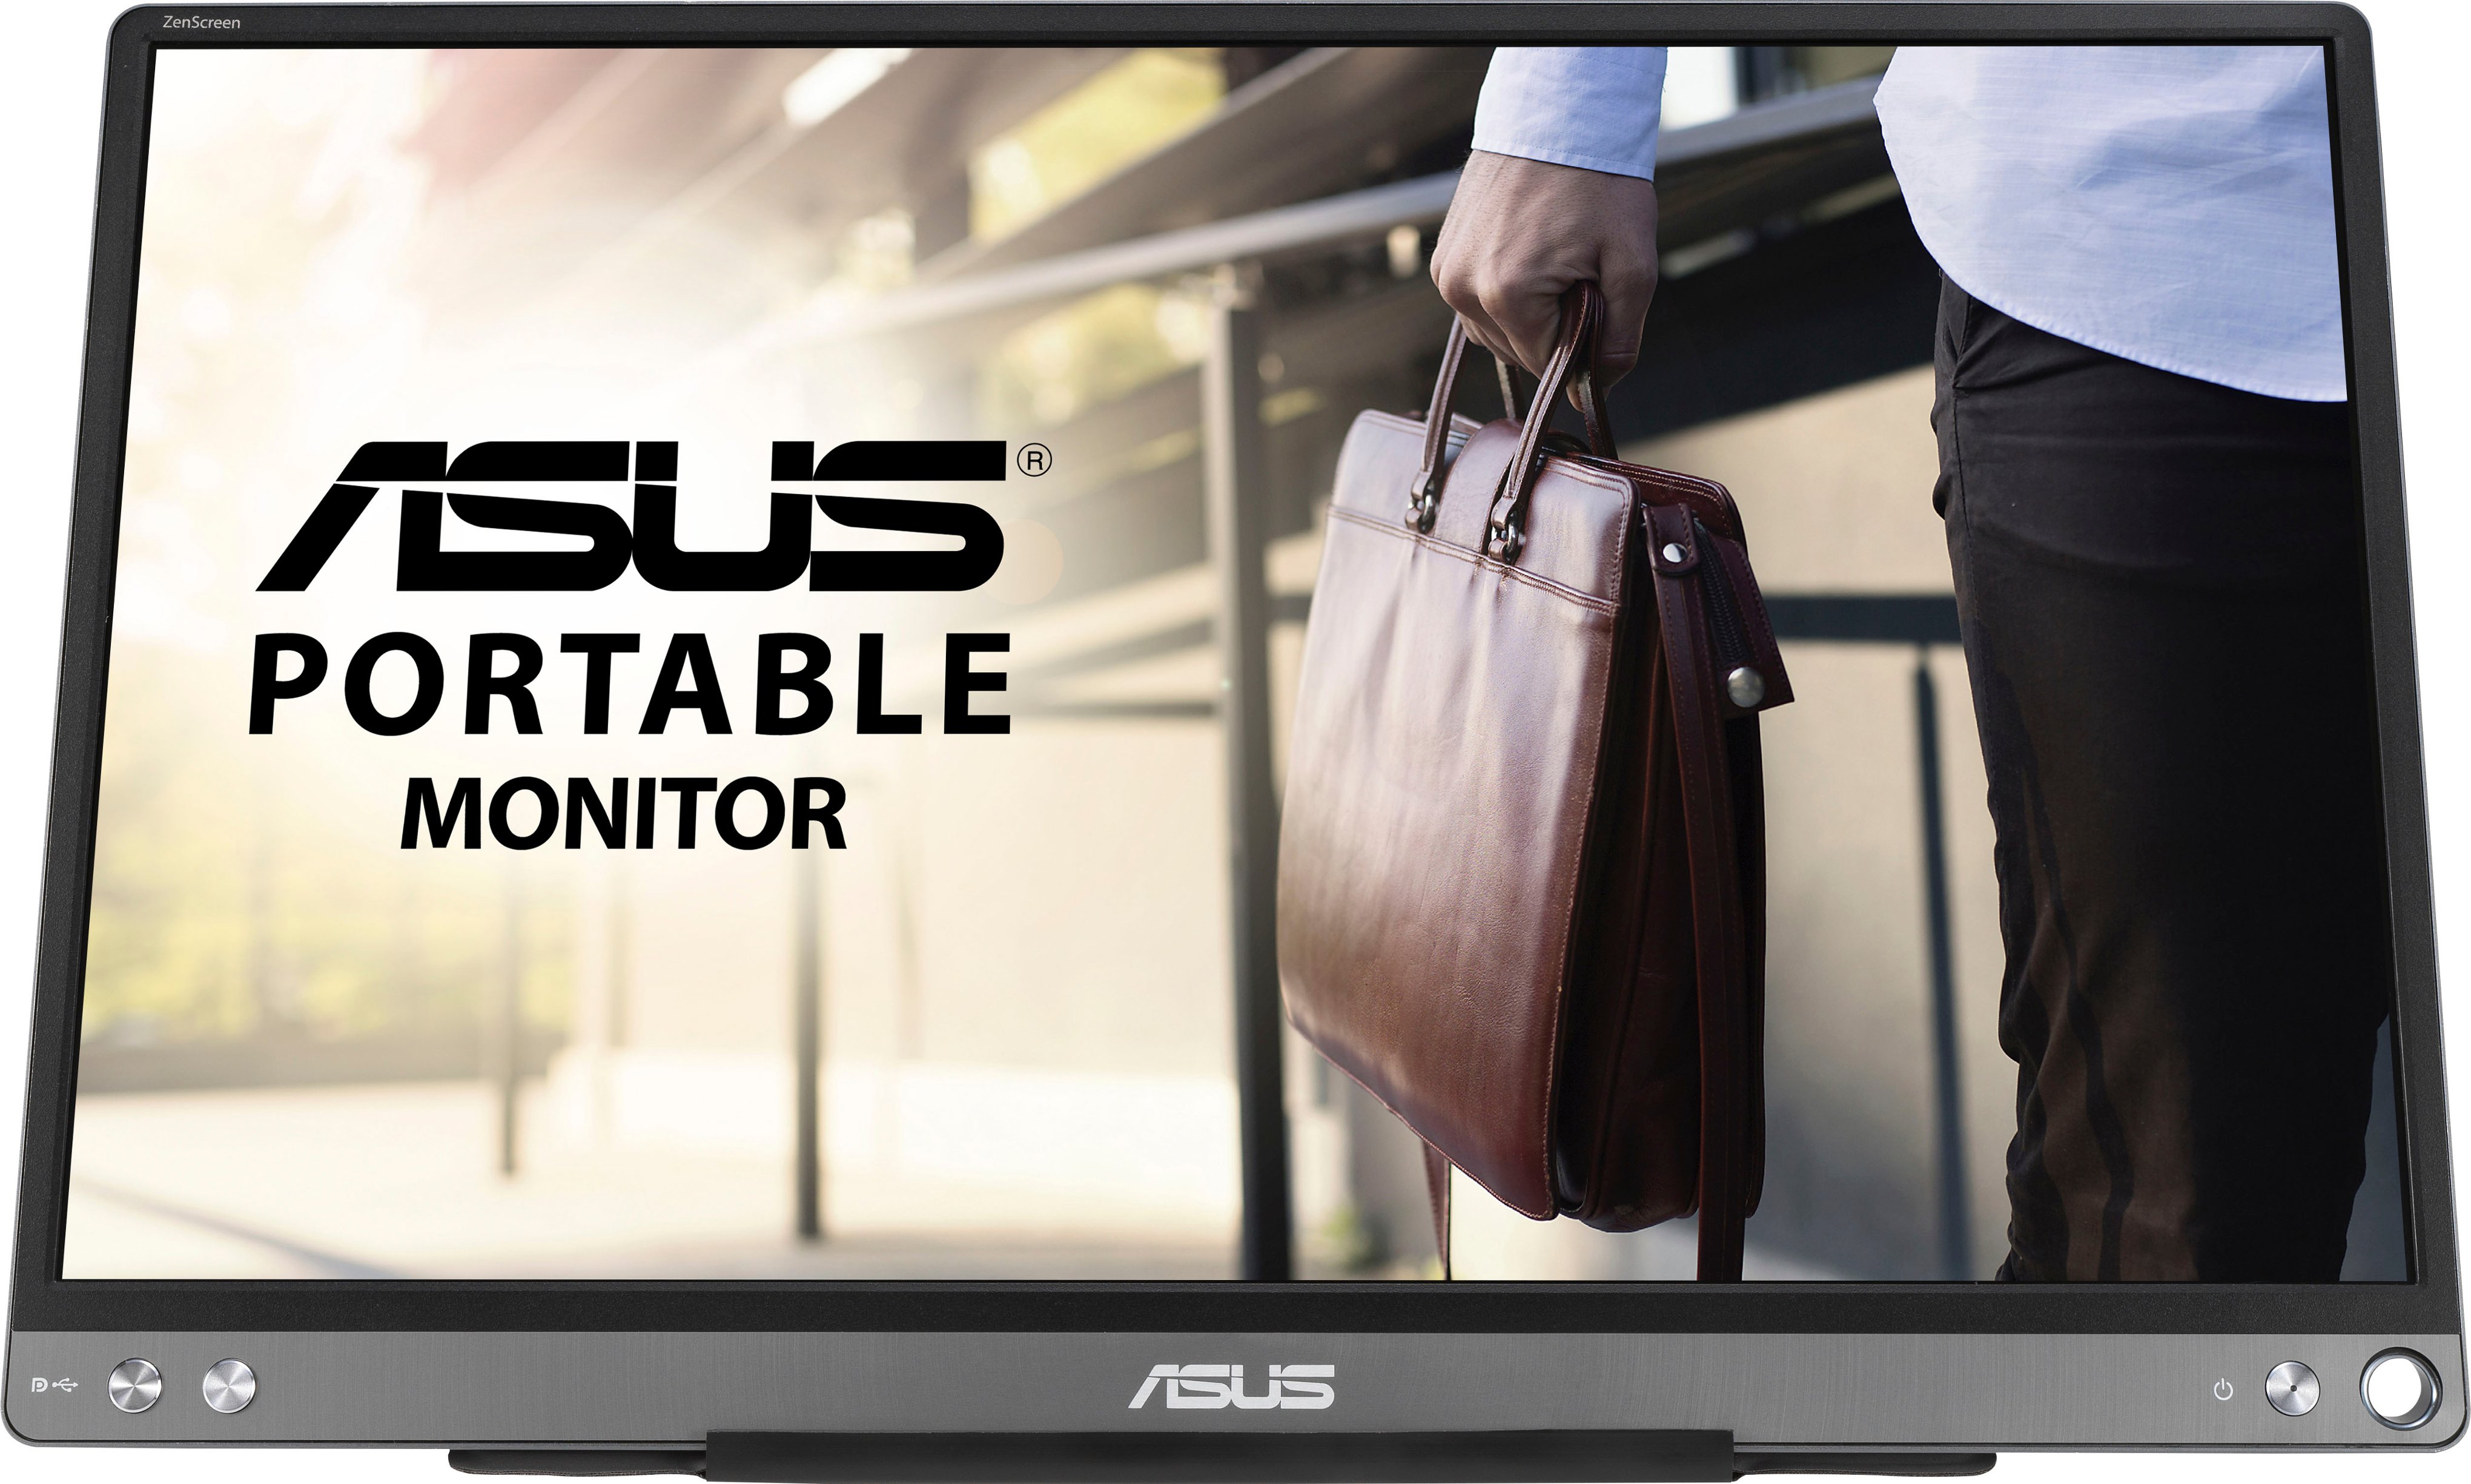 ASUS ZenScreen 15.6” IPS FHD USB Type-C Portable Monitor with